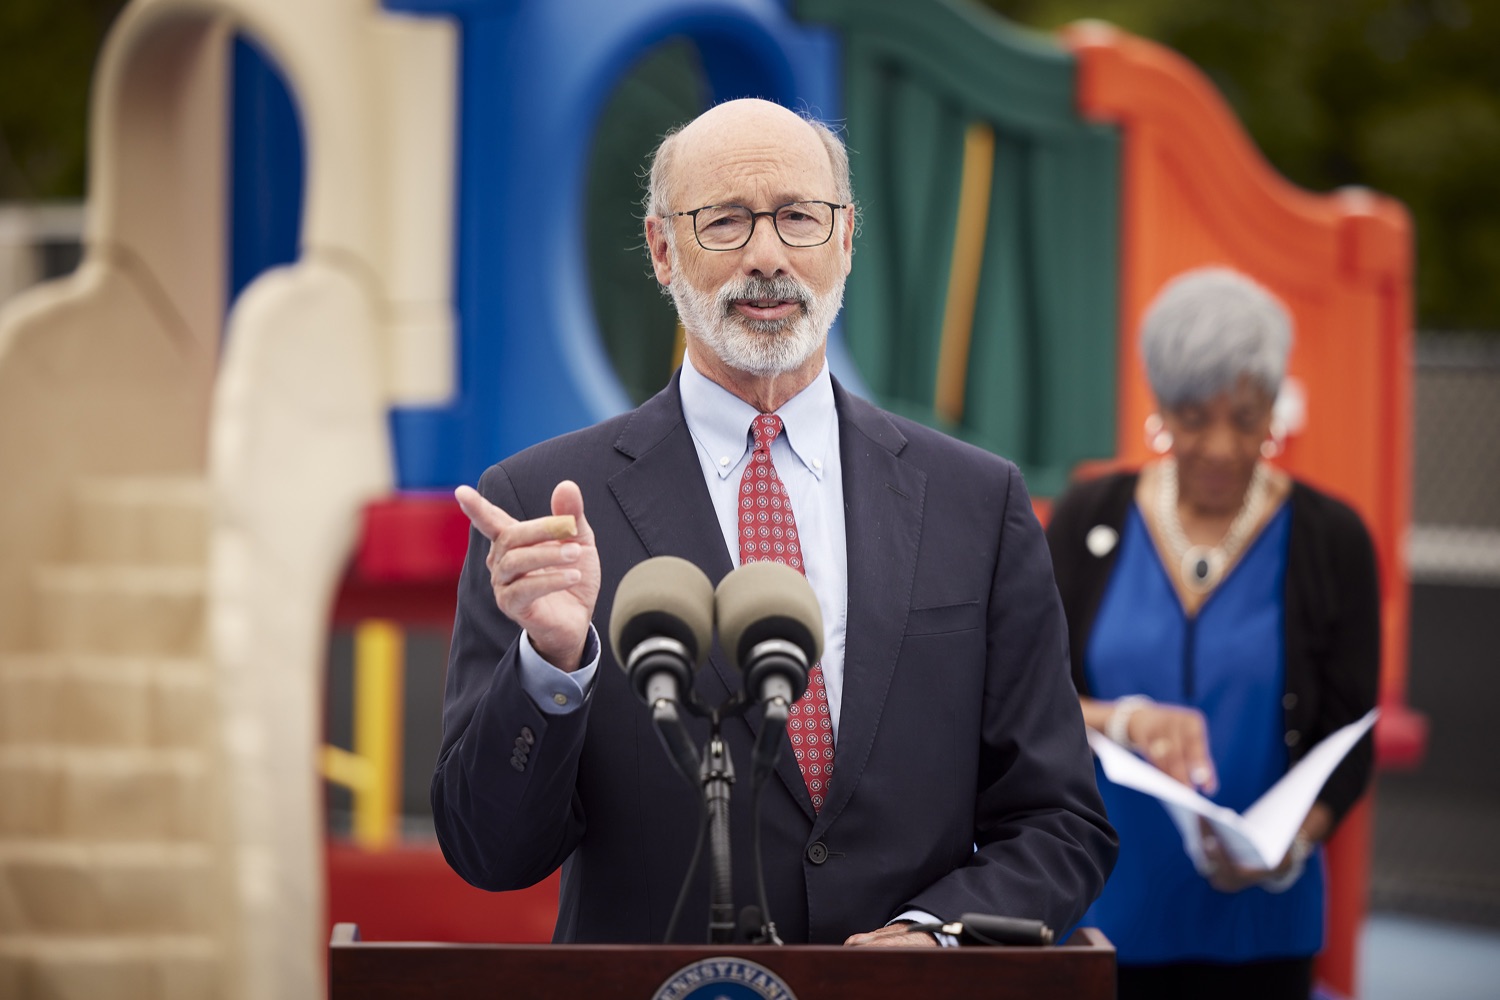 Pennsylvania Governor Tom Wolf speaks with the press.   Governor Tom Wolf today visited the Early Learning Center at Crispus Attucks in York to highlight his new state child tax credit program, modeled after the federal program, to support Pennsylvanias working families and ensure unbarred access to high-quality early childhood education.  York, PA   July 26, 2022<br><a href="https://filesource.amperwave.net/commonwealthofpa/photo/22049_gov_childTaxCredit_dz_001.JPG" target="_blank">⇣ Download Photo</a>